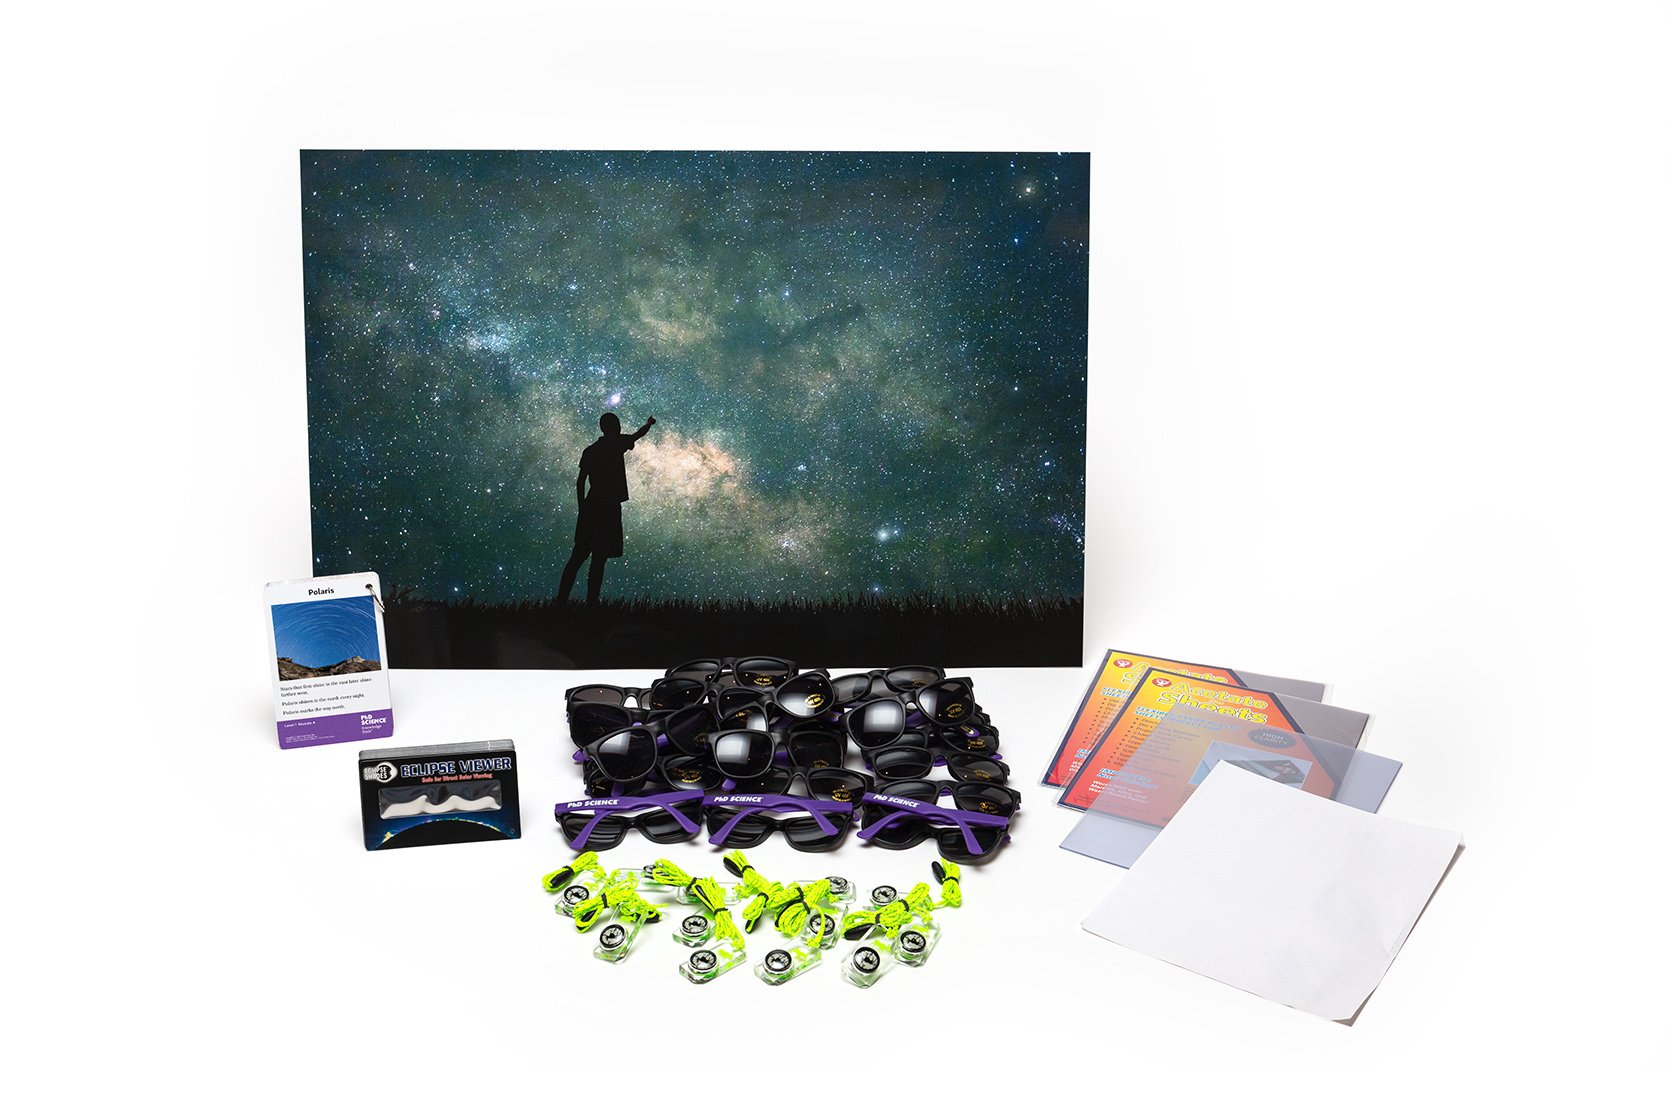 PhD Science hands-on materials kit from Level 1 Module 4 that includes sunglasses, compasses, solar viewers, and Knowledge Deck cards and poster